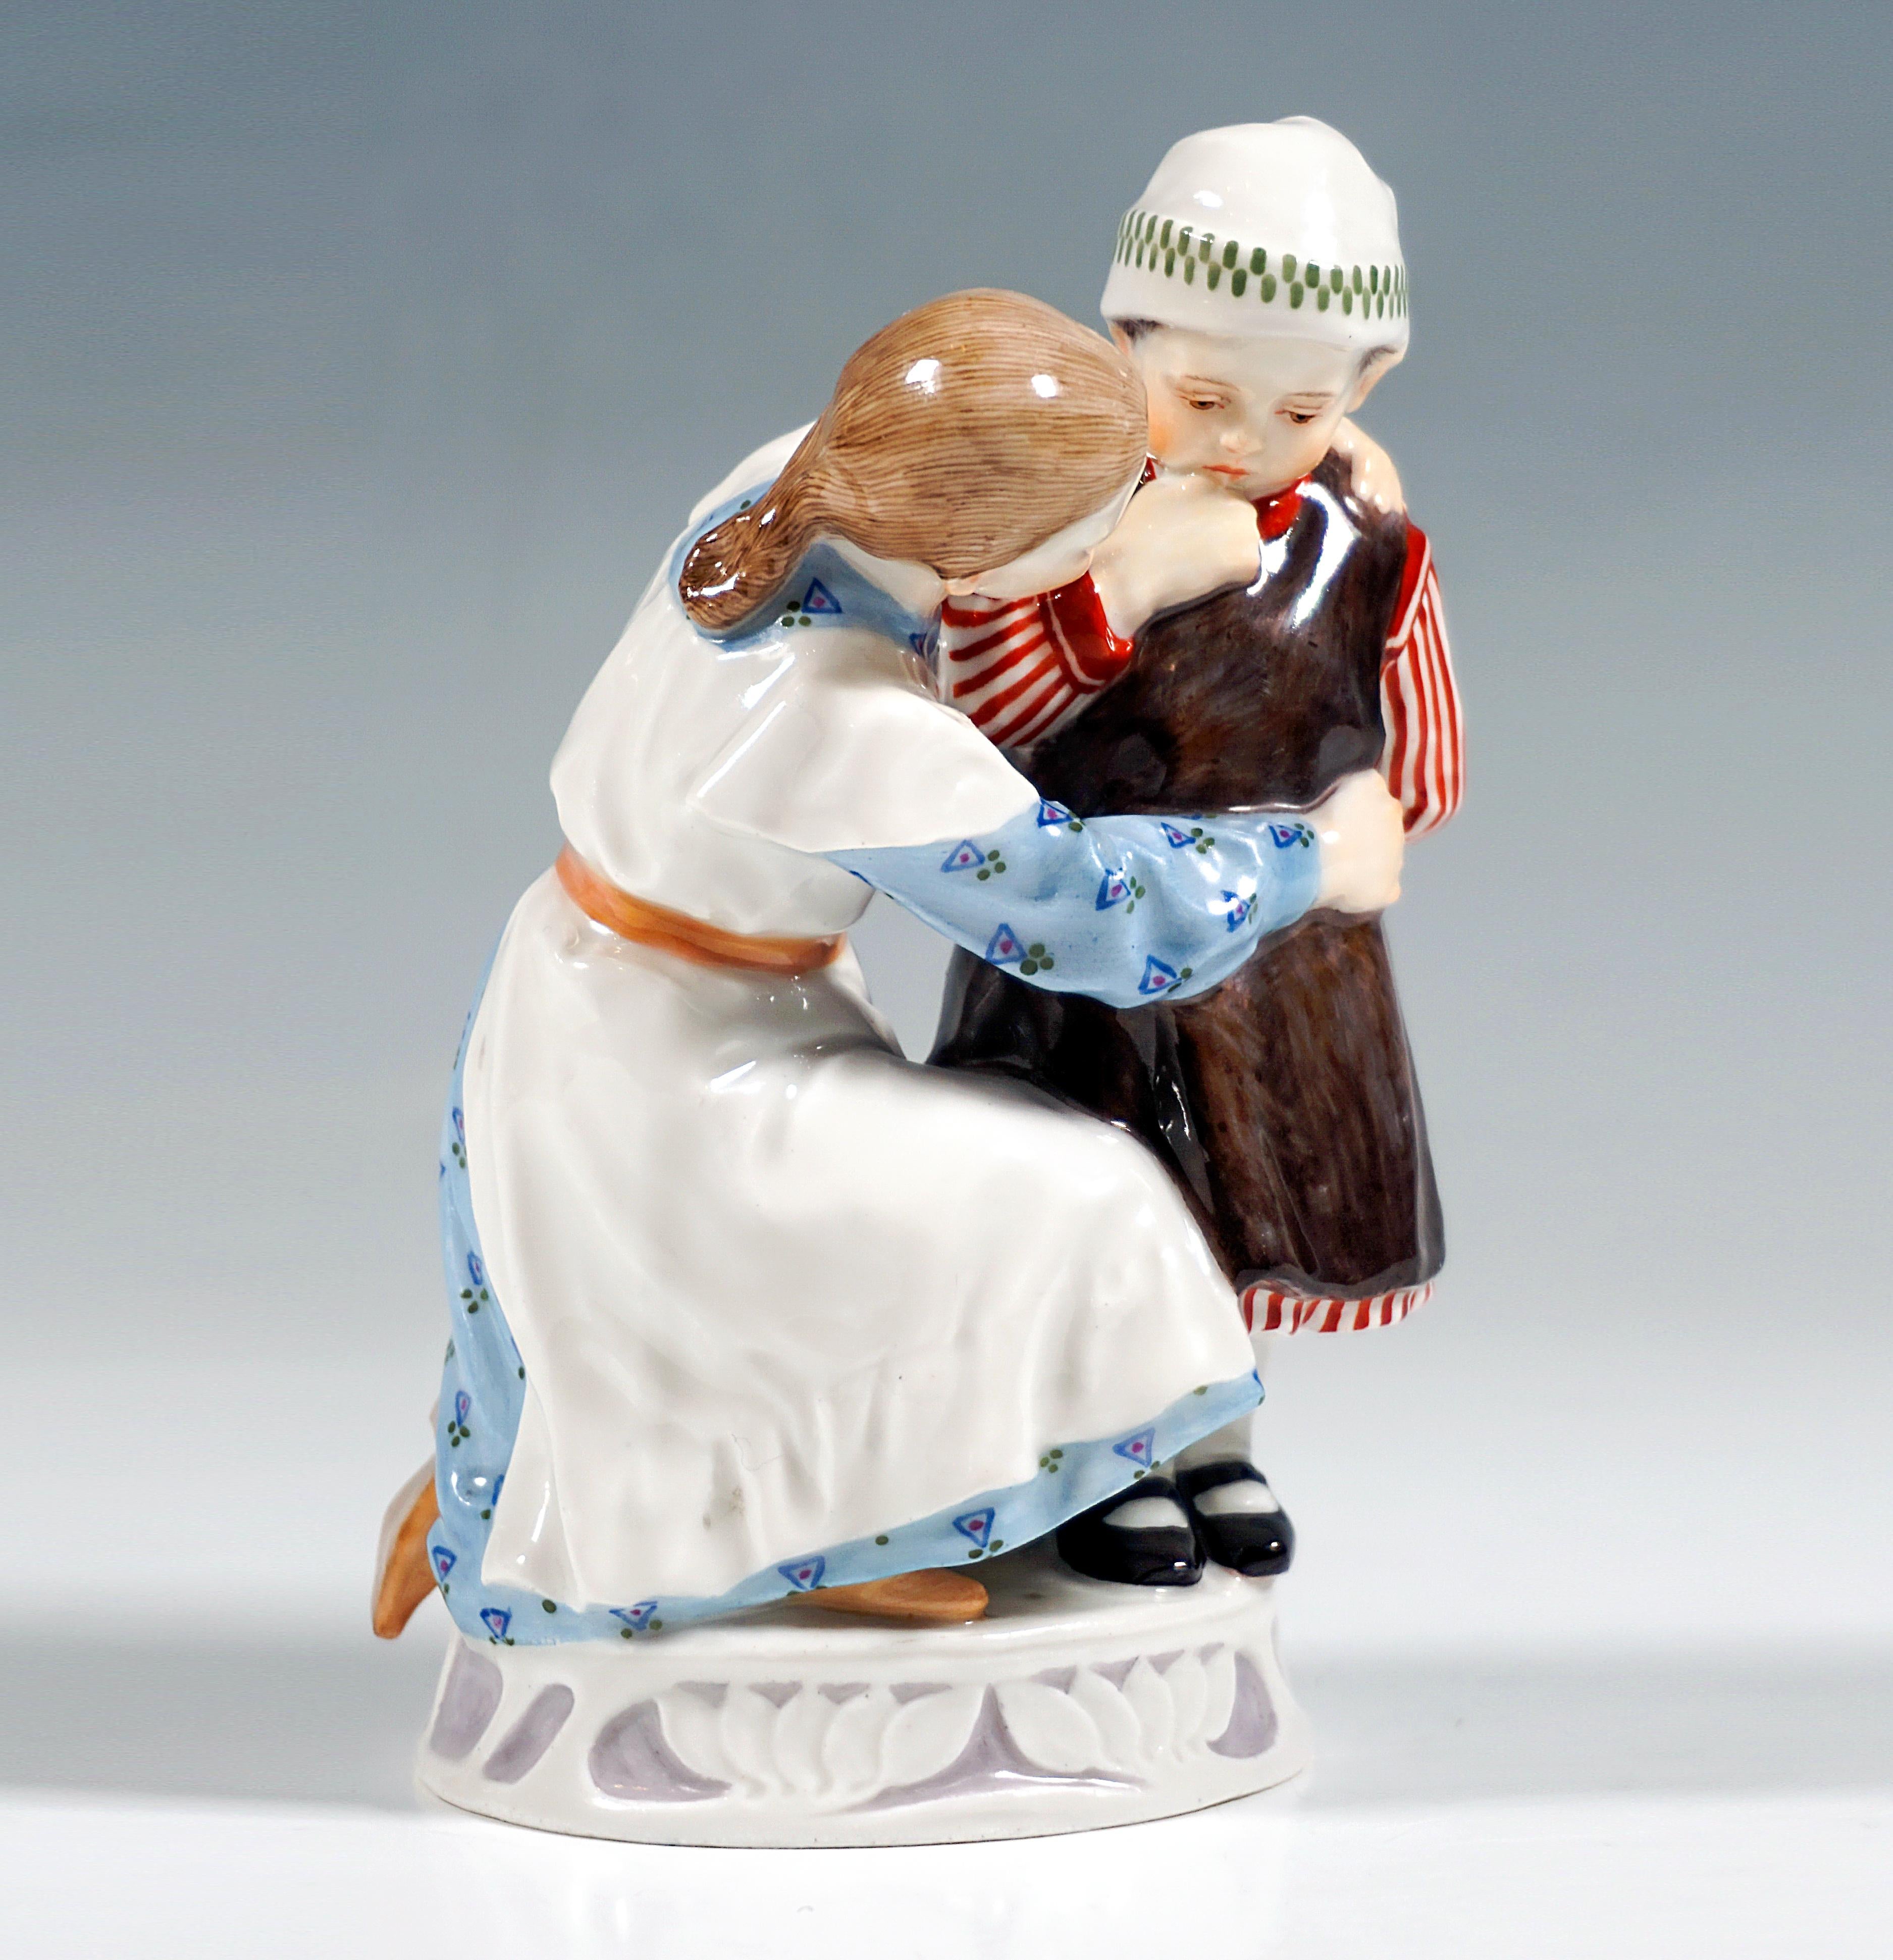 Very rare Meissen Art Nouveau porcelain figure group:
Girl and child in clothing from around 1900, the girl in a blue patterned long-sleeved dress with a white apron kneeling on the floor and a small standing child in a white and red striped dress